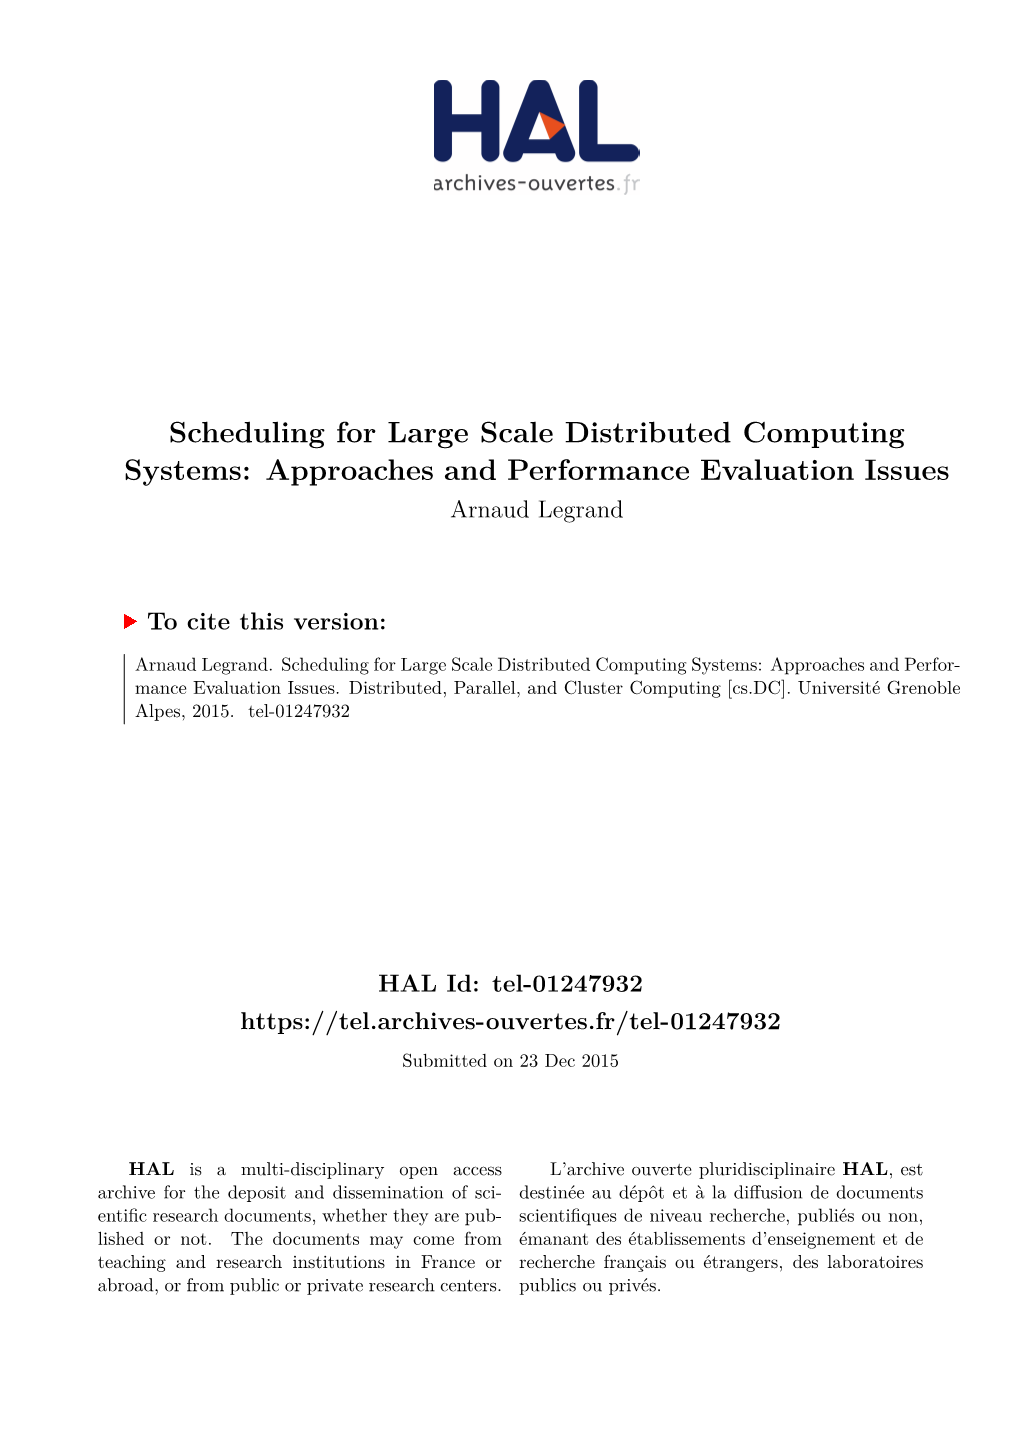 Scheduling for Large Scale Distributed Computing Systems: Approaches and Performance Evaluation Issues Arnaud Legrand